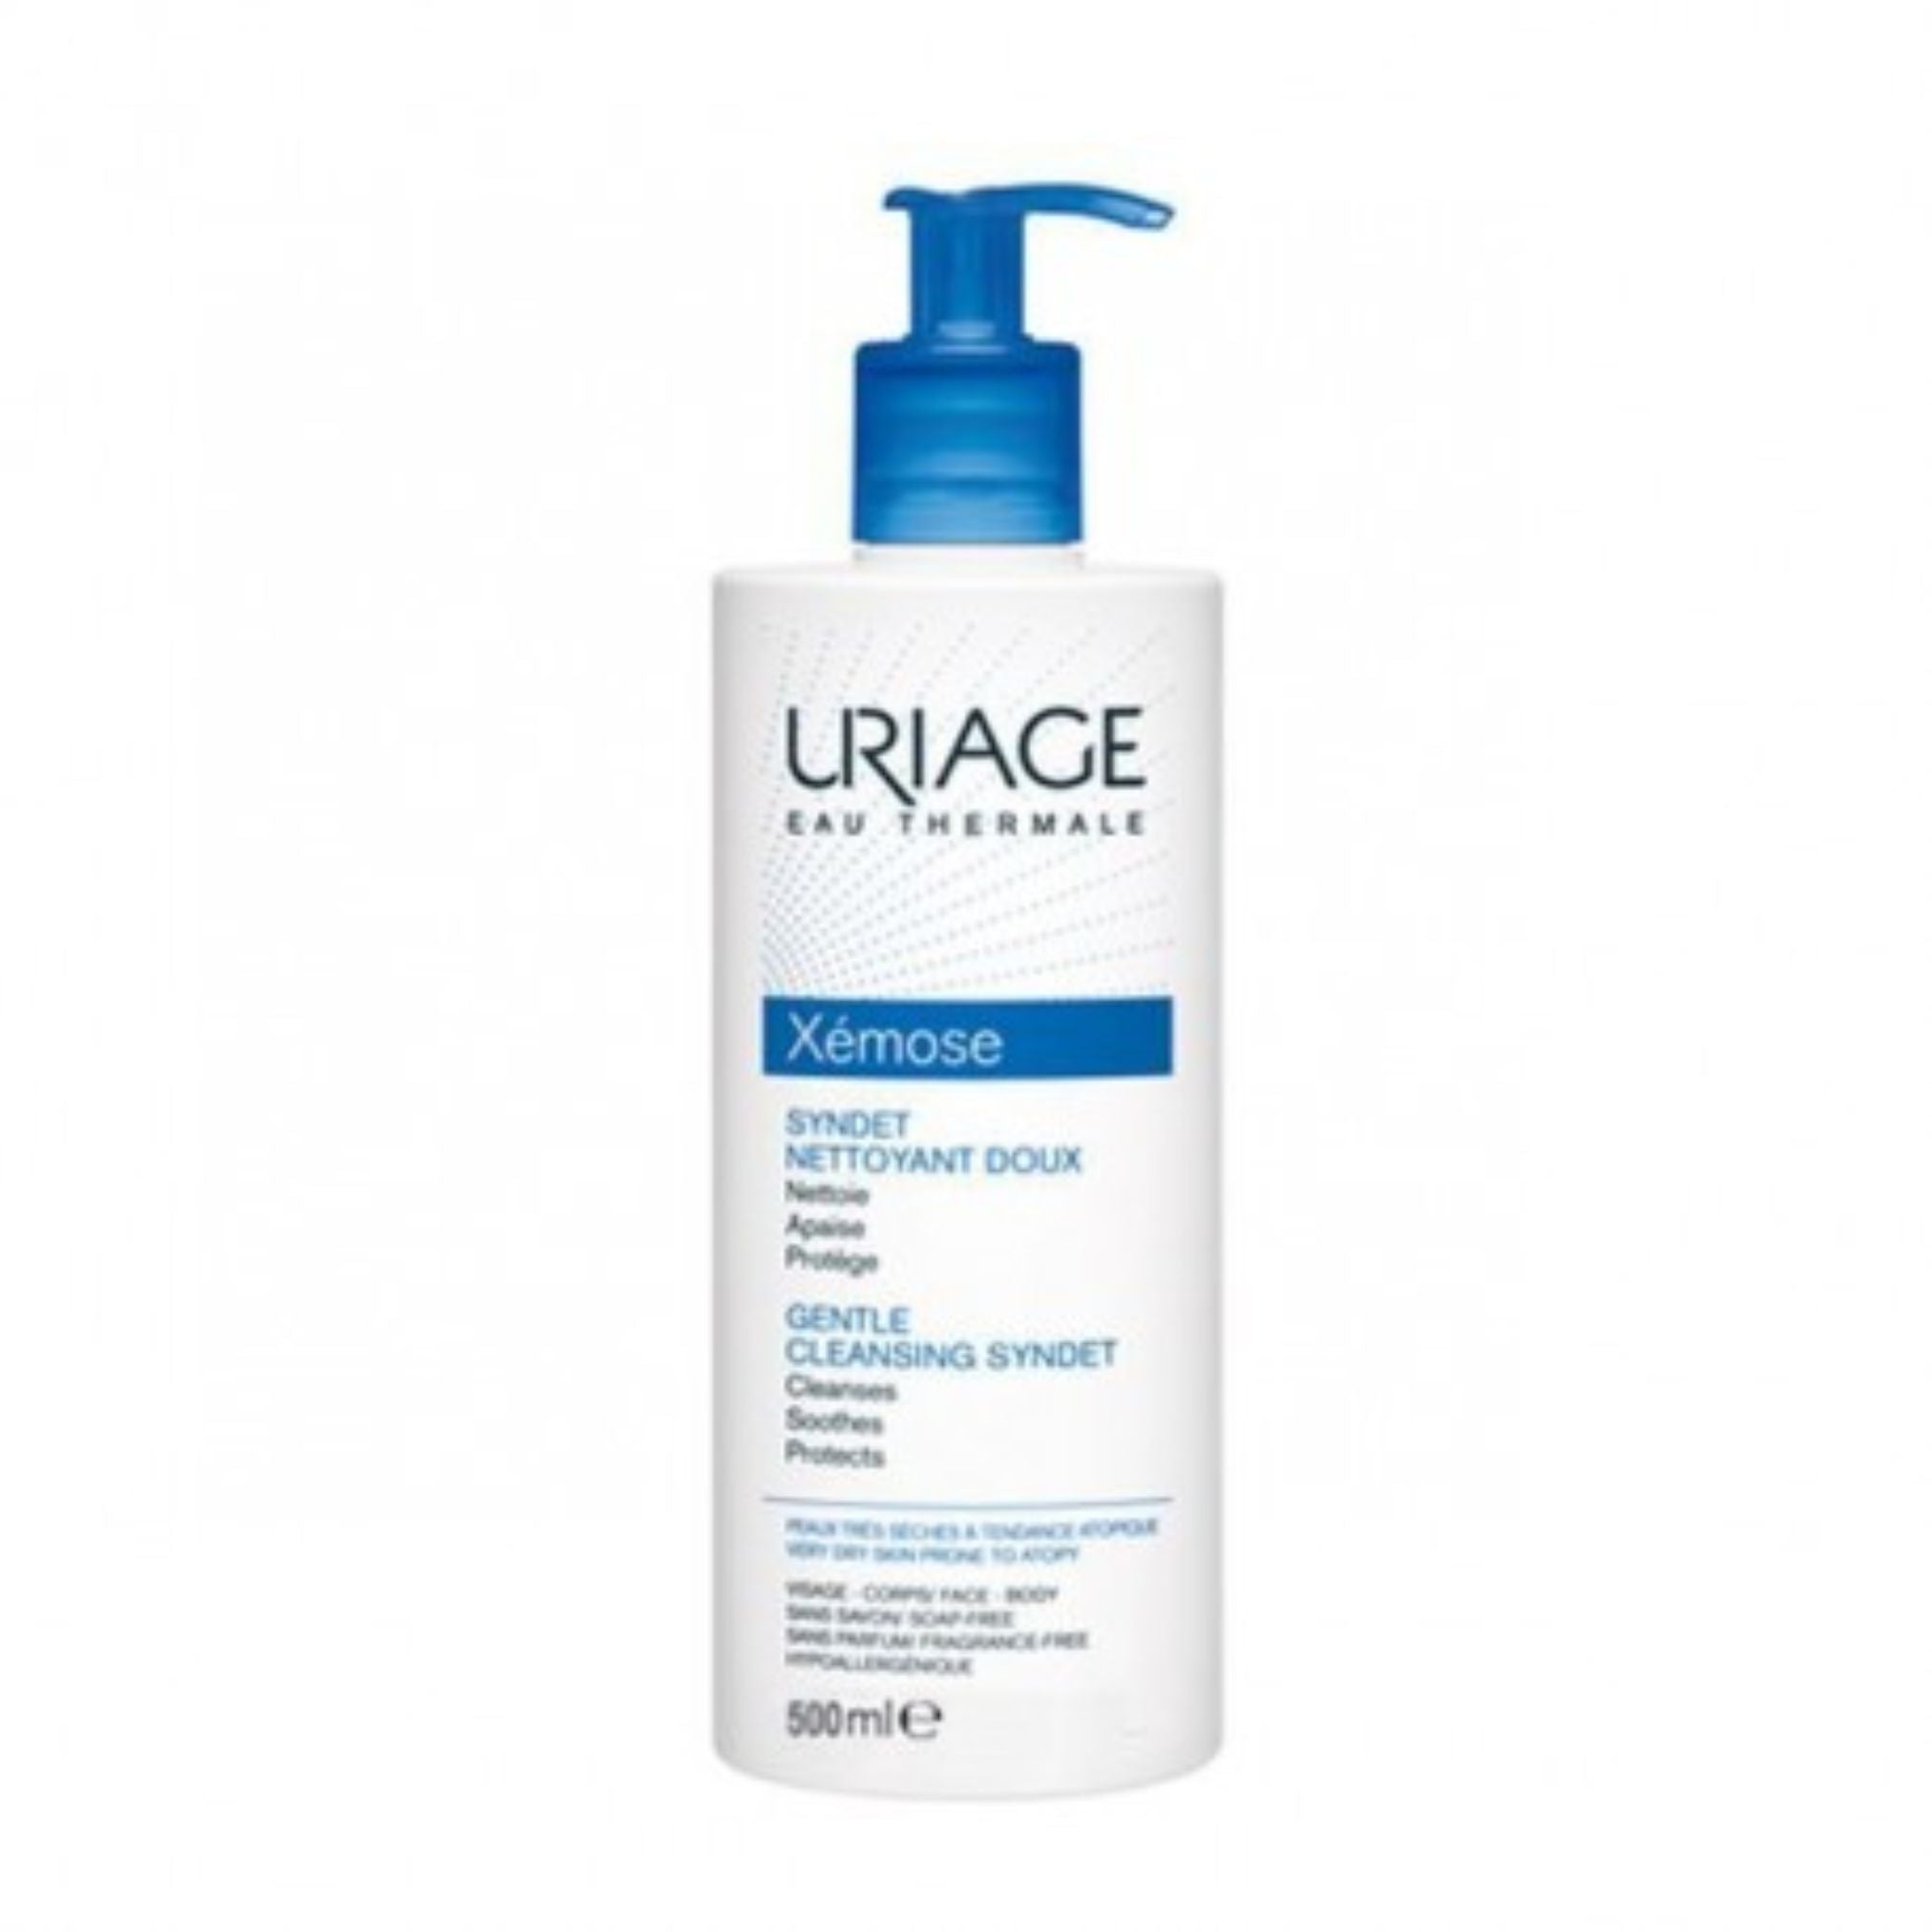 Uriage Eau Thermale Xémose Gentle Cleansing Syndet 500ml